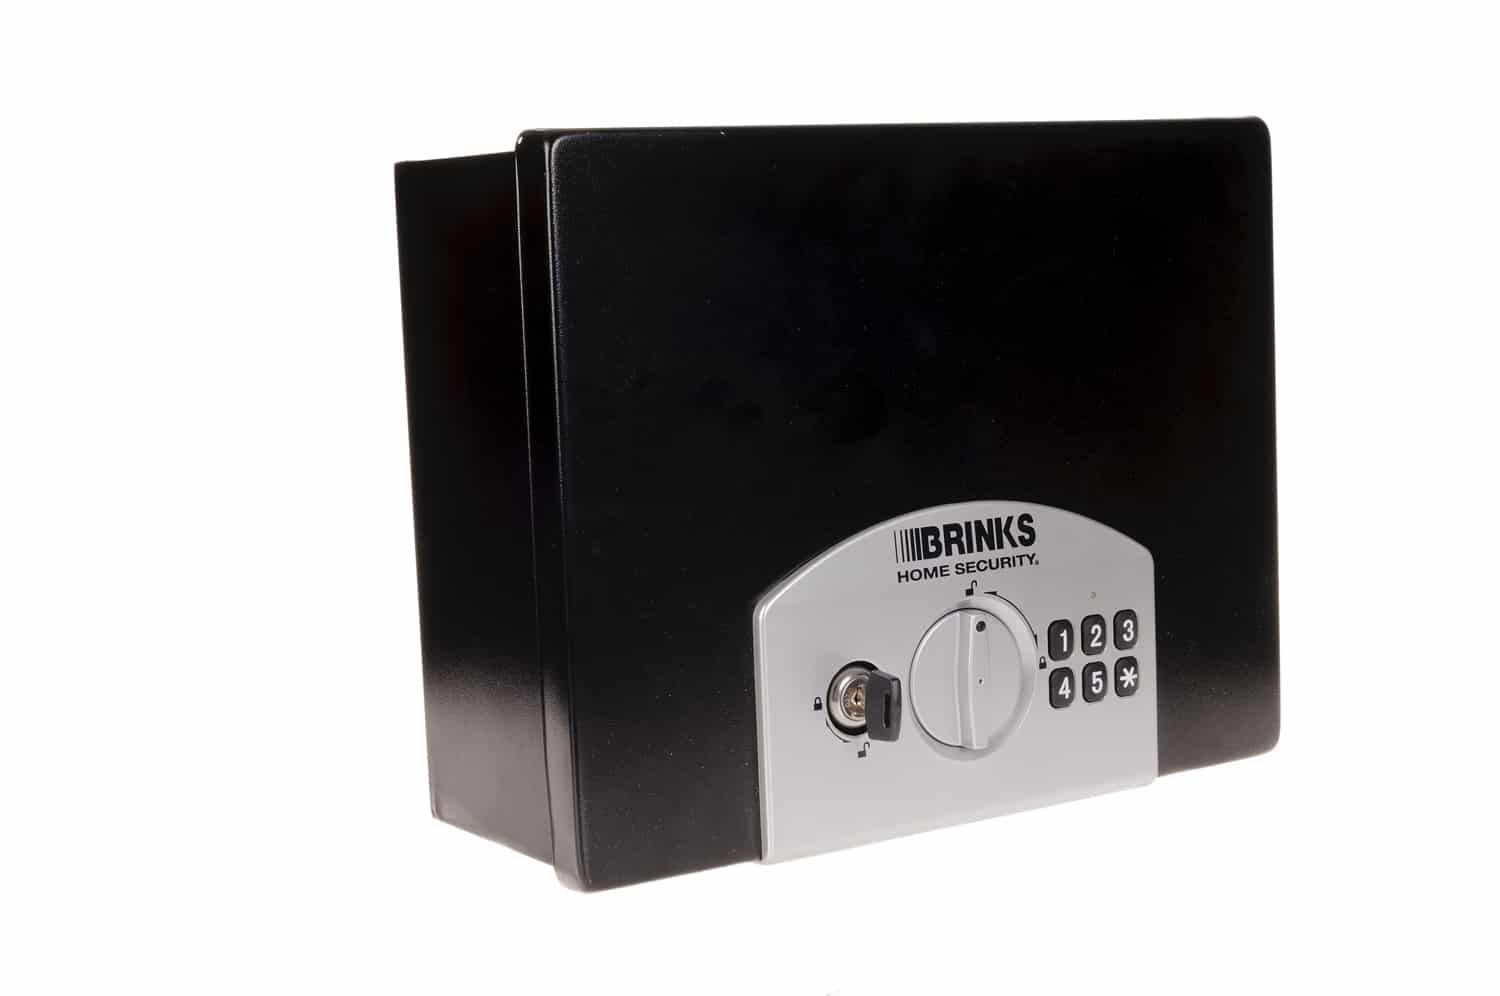 Brinks small sized wall safe with keypad and/or key entry